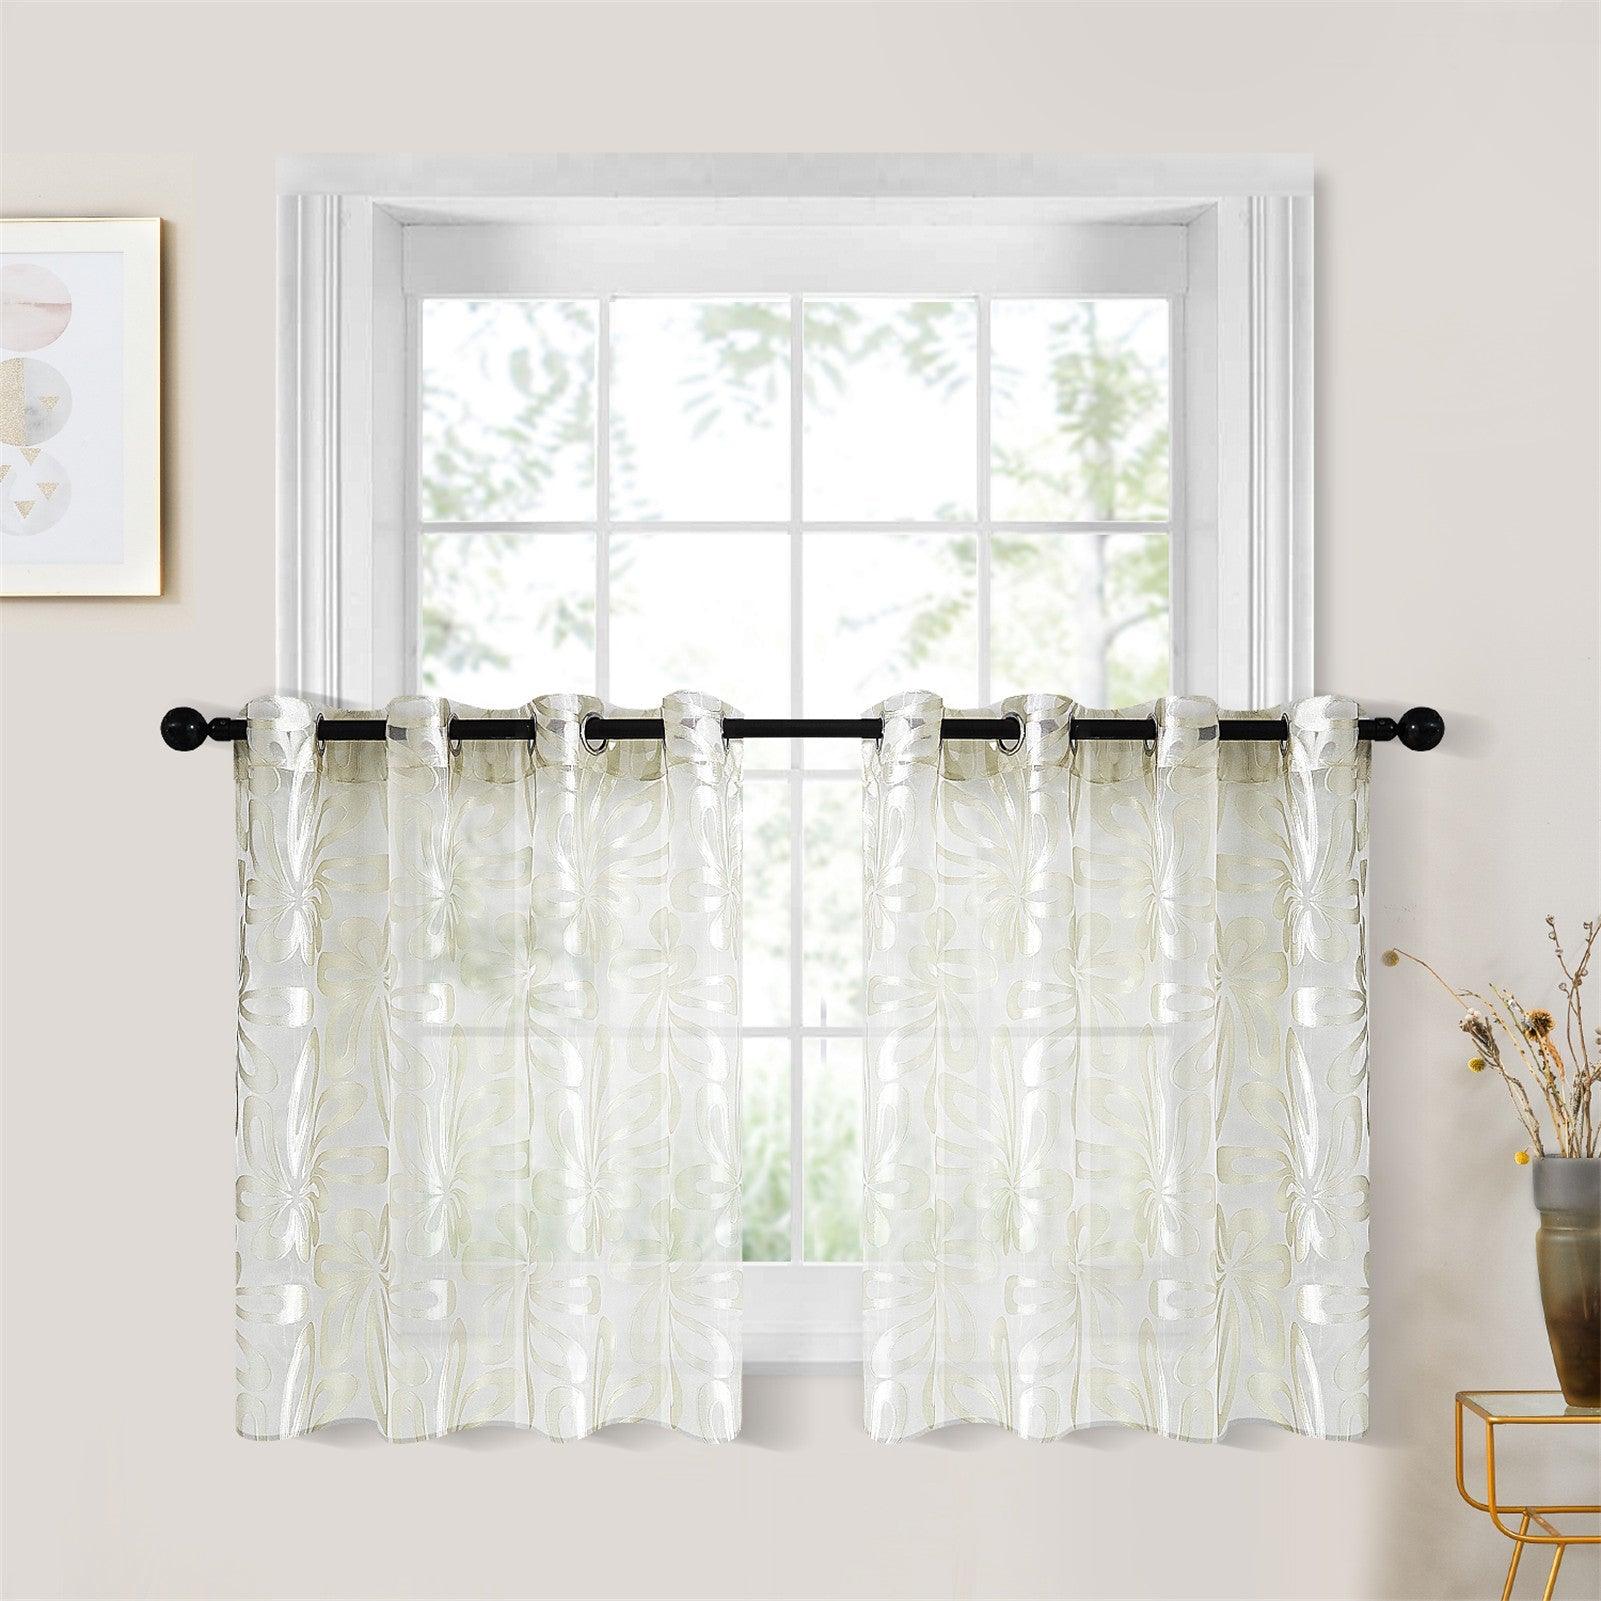 Topfinel Semi Tier & Cafe Curtains Floral  White Sheer Crtains For Kitchen,2 Panels - Topfinel